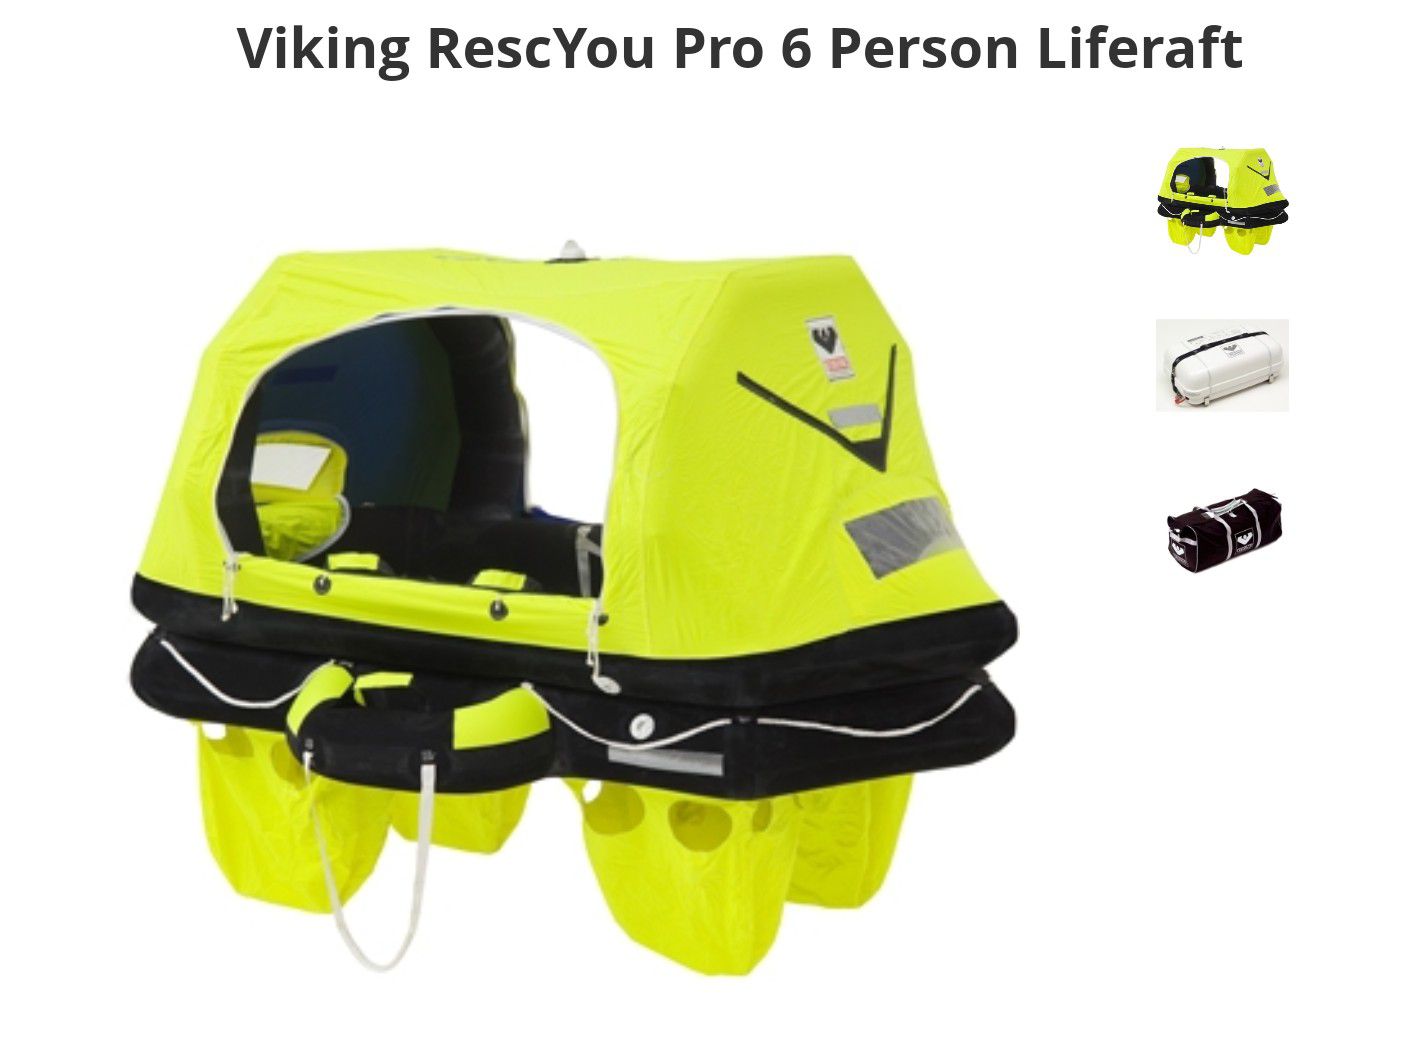 6 person inflatable life raft